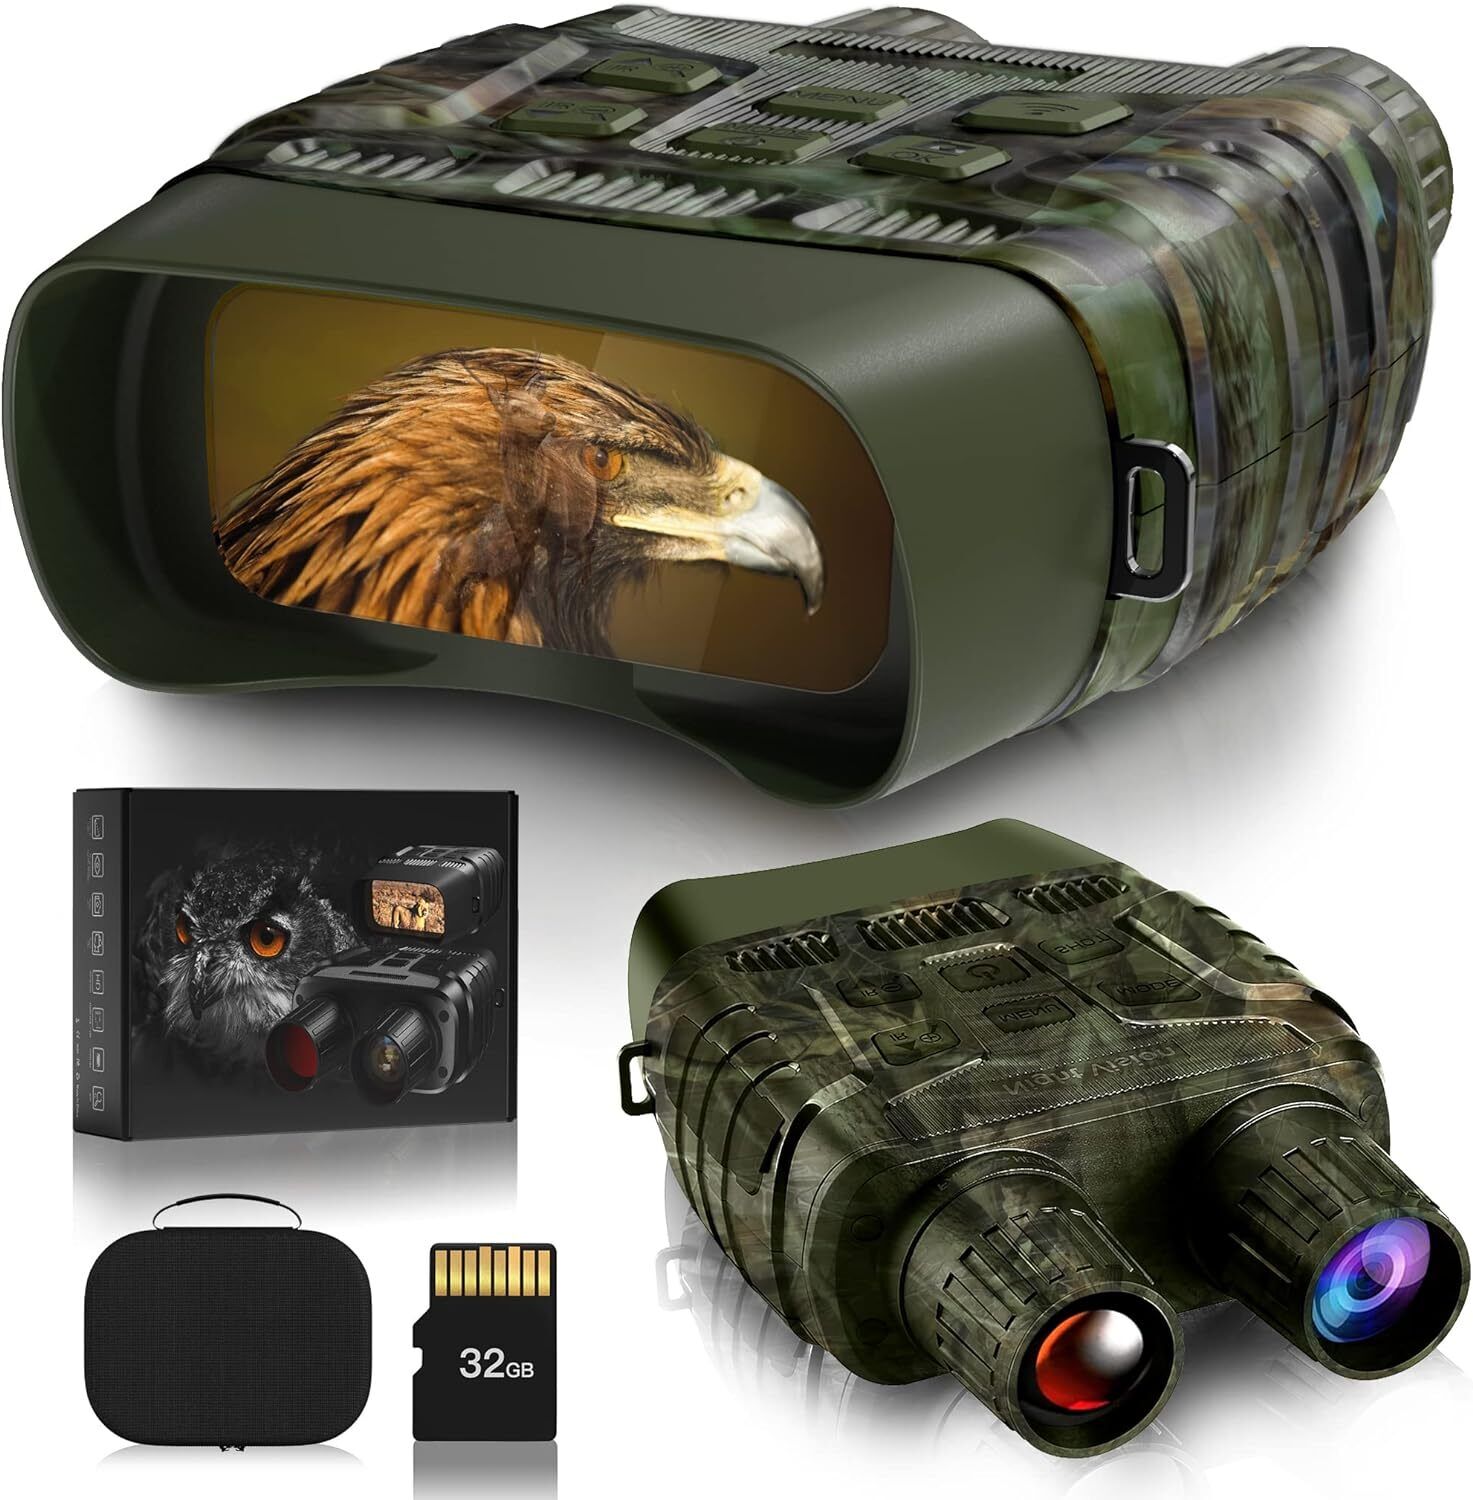 1080P Digital Night Vision Goggles 32GB Memory-For Total Darkness Surveillance